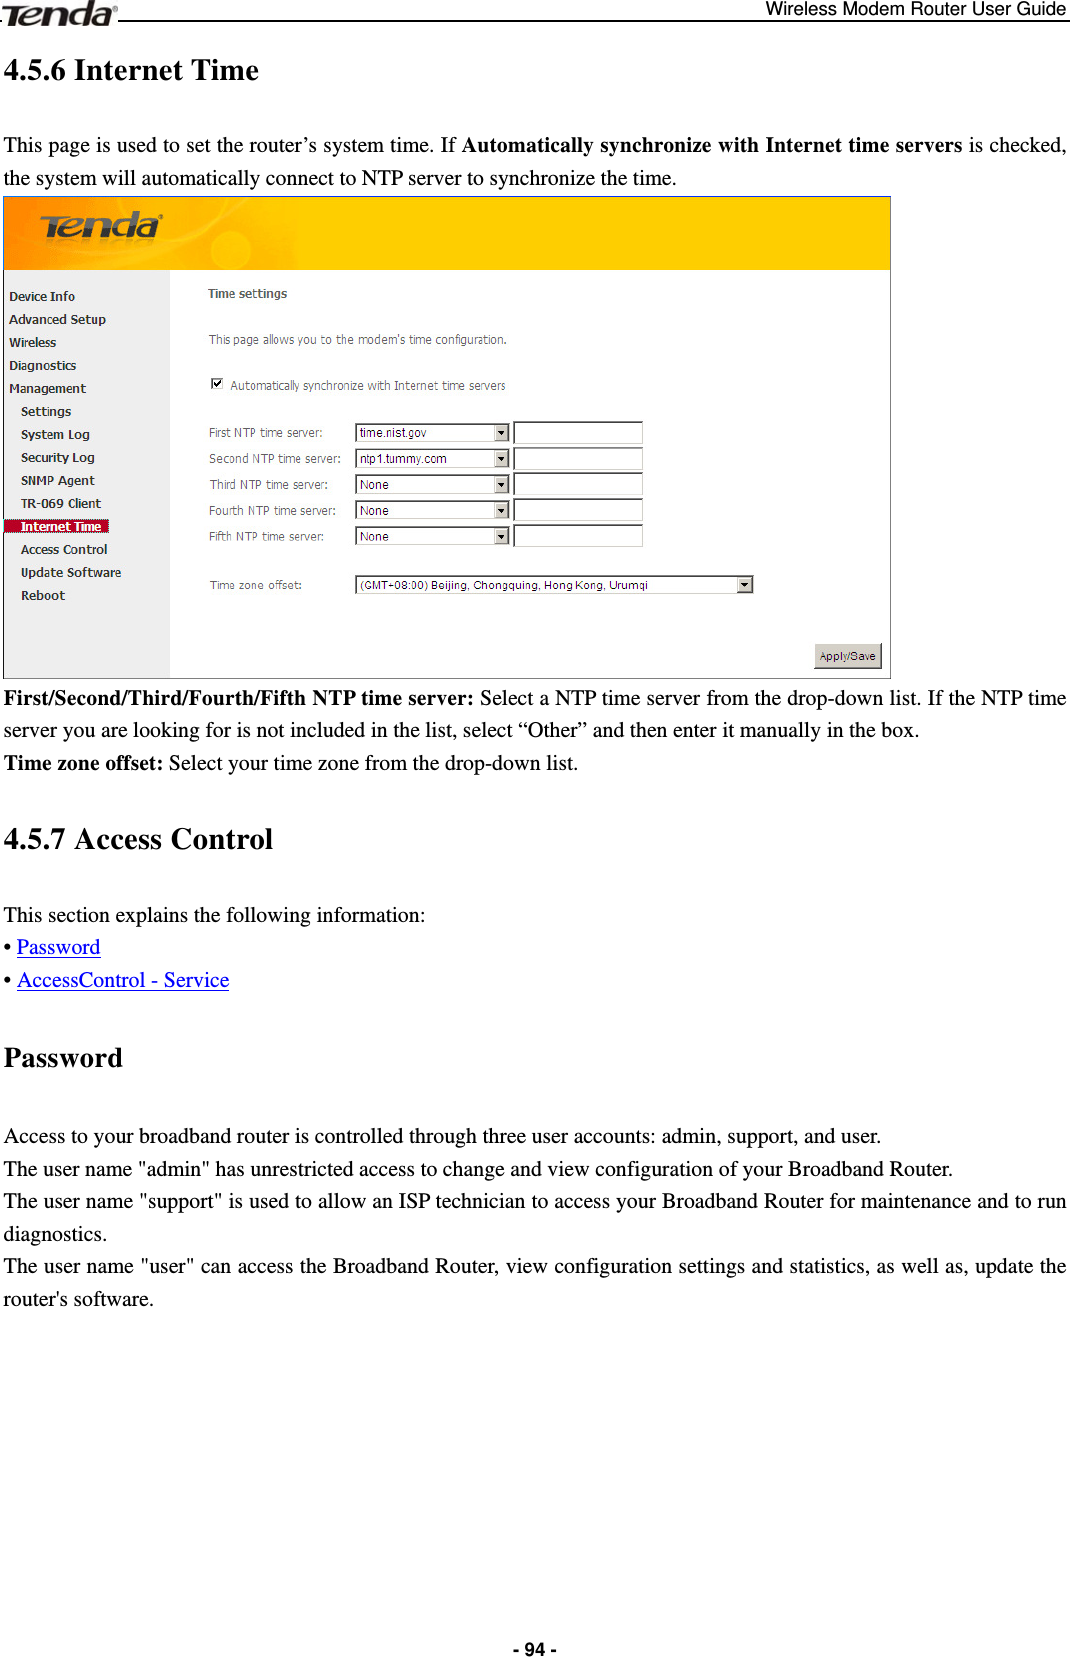 Wireless Modem Router User Guide  - 94 -4.5.6 Internet Time This page is used to set the router’s system time. If Automatically synchronize with Internet time servers is checked, the system will automatically connect to NTP server to synchronize the time.    First/Second/Third/Fourth/Fifth NTP time server: Select a NTP time server from the drop-down list. If the NTP time server you are looking for is not included in the list, select “Other” and then enter it manually in the box. Time zone offset: Select your time zone from the drop-down list. 4.5.7 Access Control This section explains the following information: • Password • AccessControl - Service Password Access to your broadband router is controlled through three user accounts: admin, support, and user. The user name &quot;admin&quot; has unrestricted access to change and view configuration of your Broadband Router. The user name &quot;support&quot; is used to allow an ISP technician to access your Broadband Router for maintenance and to run diagnostics. The user name &quot;user&quot; can access the Broadband Router, view configuration settings and statistics, as well as, update the router&apos;s software.  